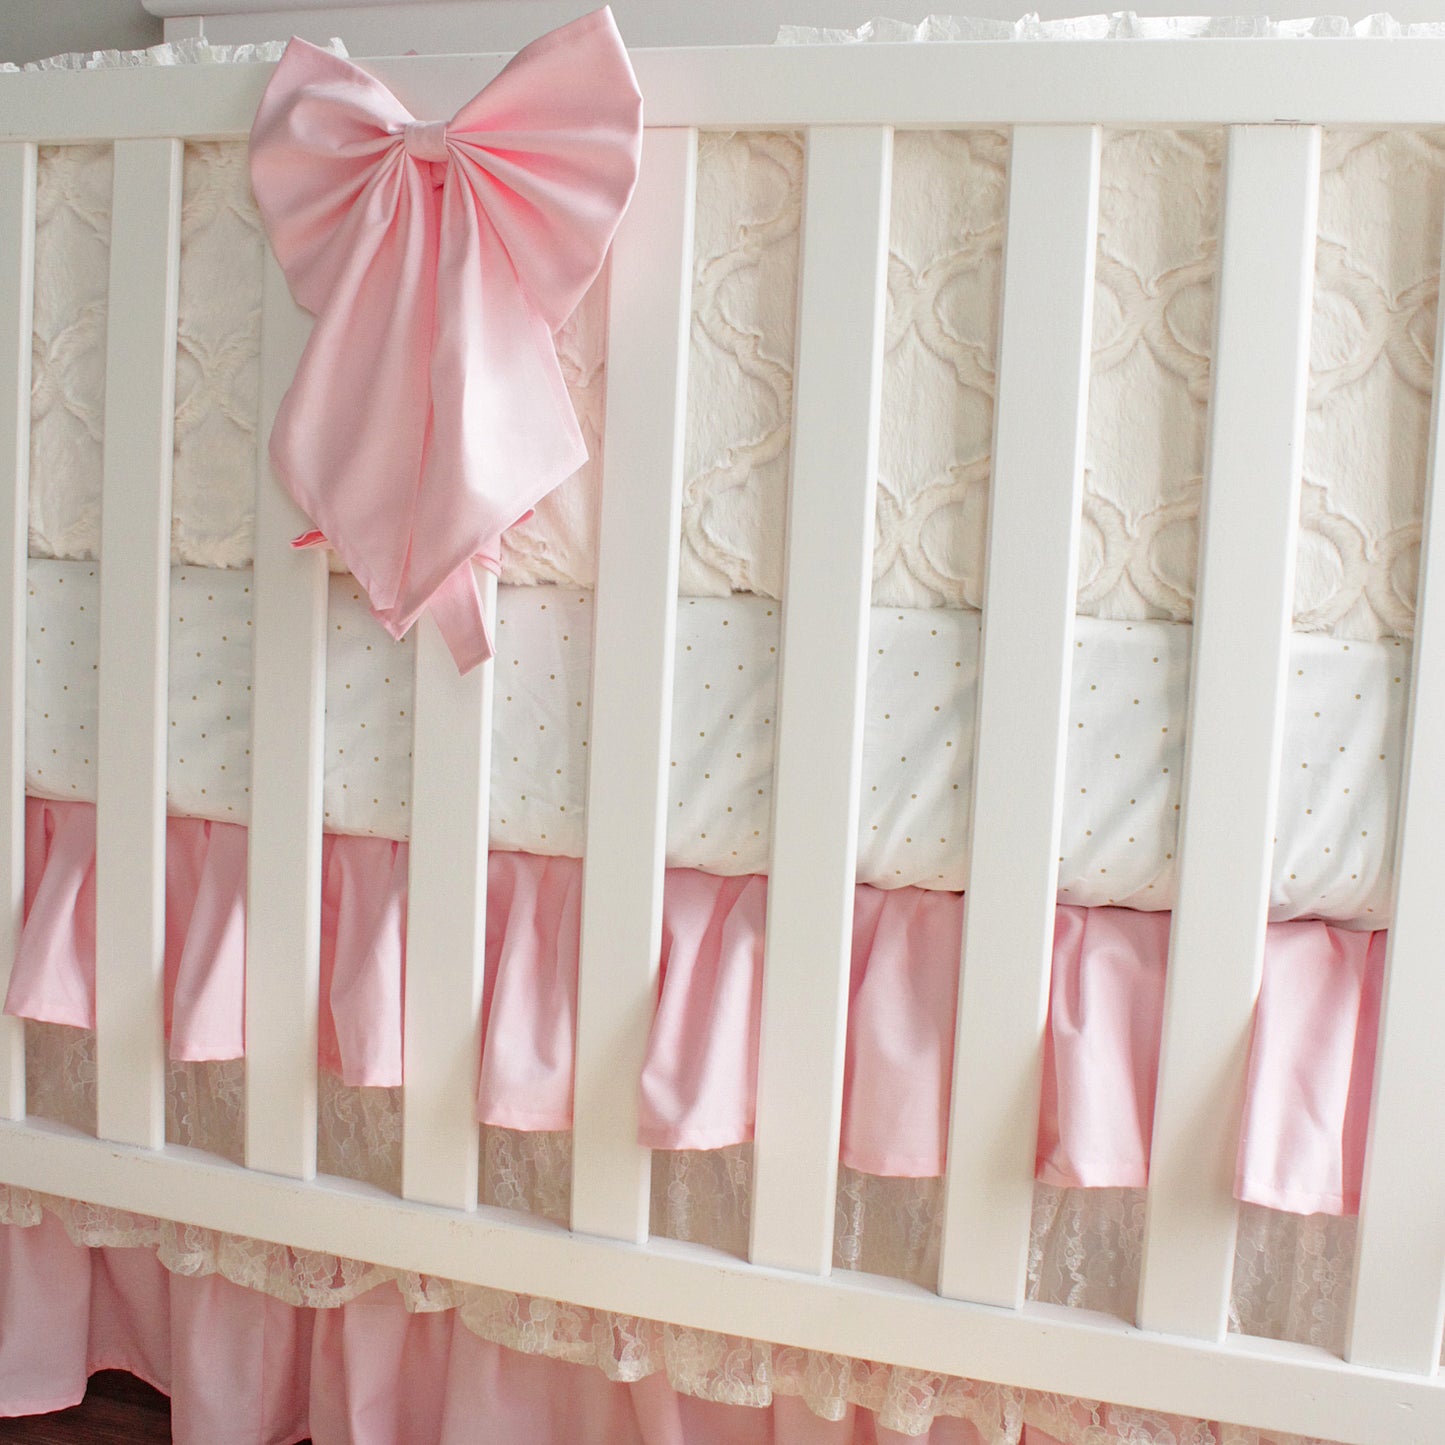 Pink and Ivory Minky Lace Scallop Rail Cover Baby Girl Crib Bedding